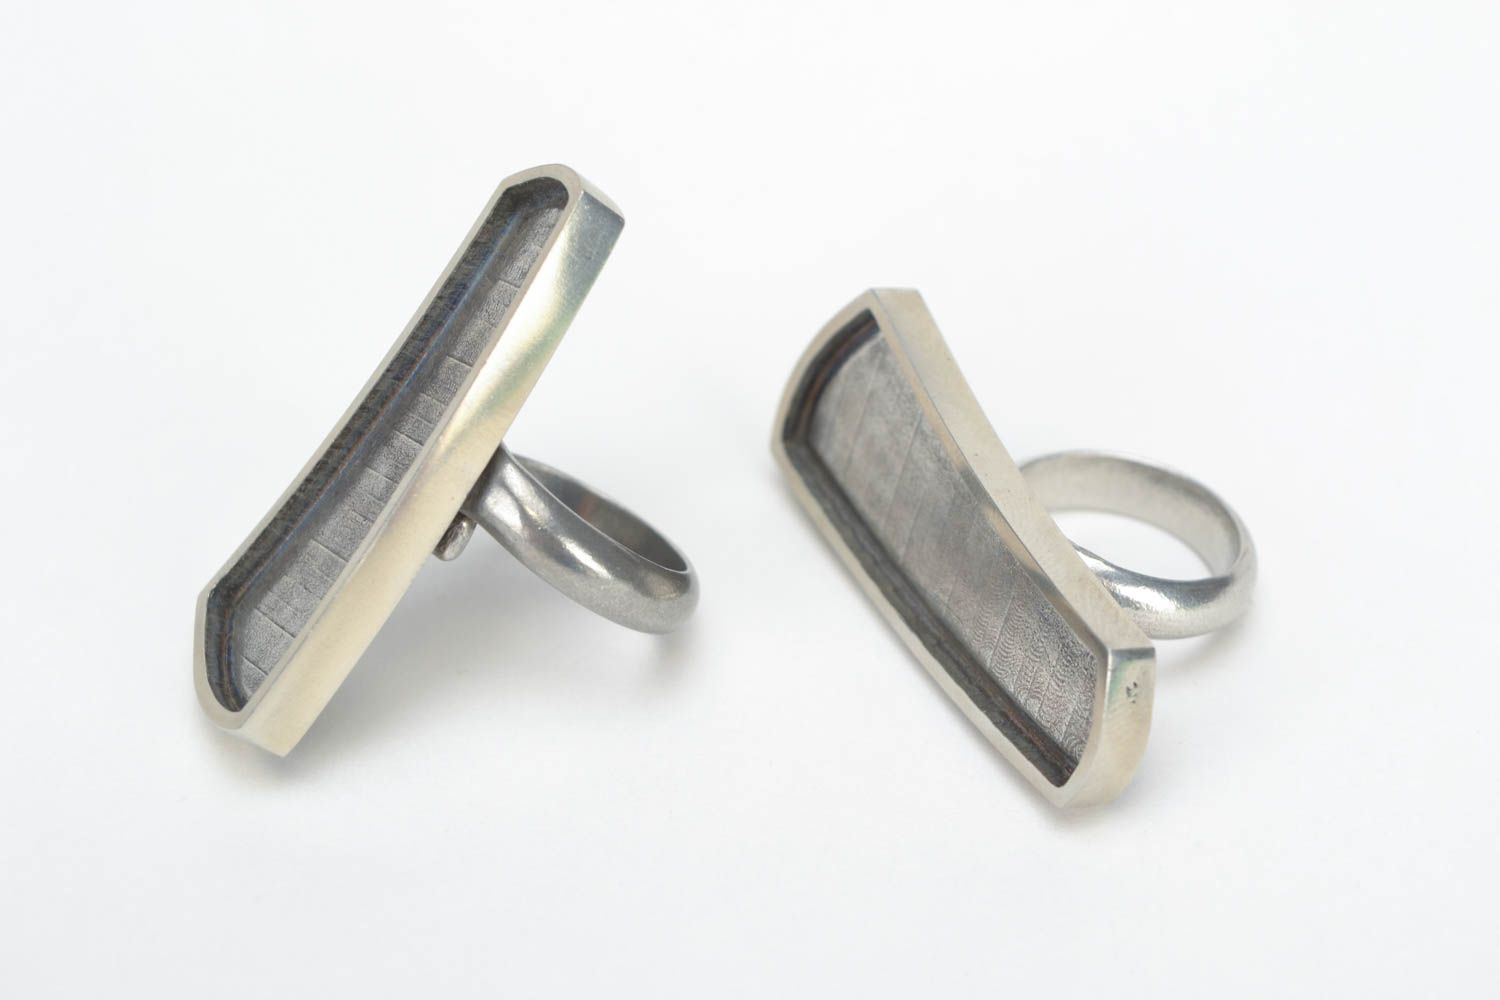 Blanks for creative work metal rings with adjustable sizes set of 2 pieces photo 2